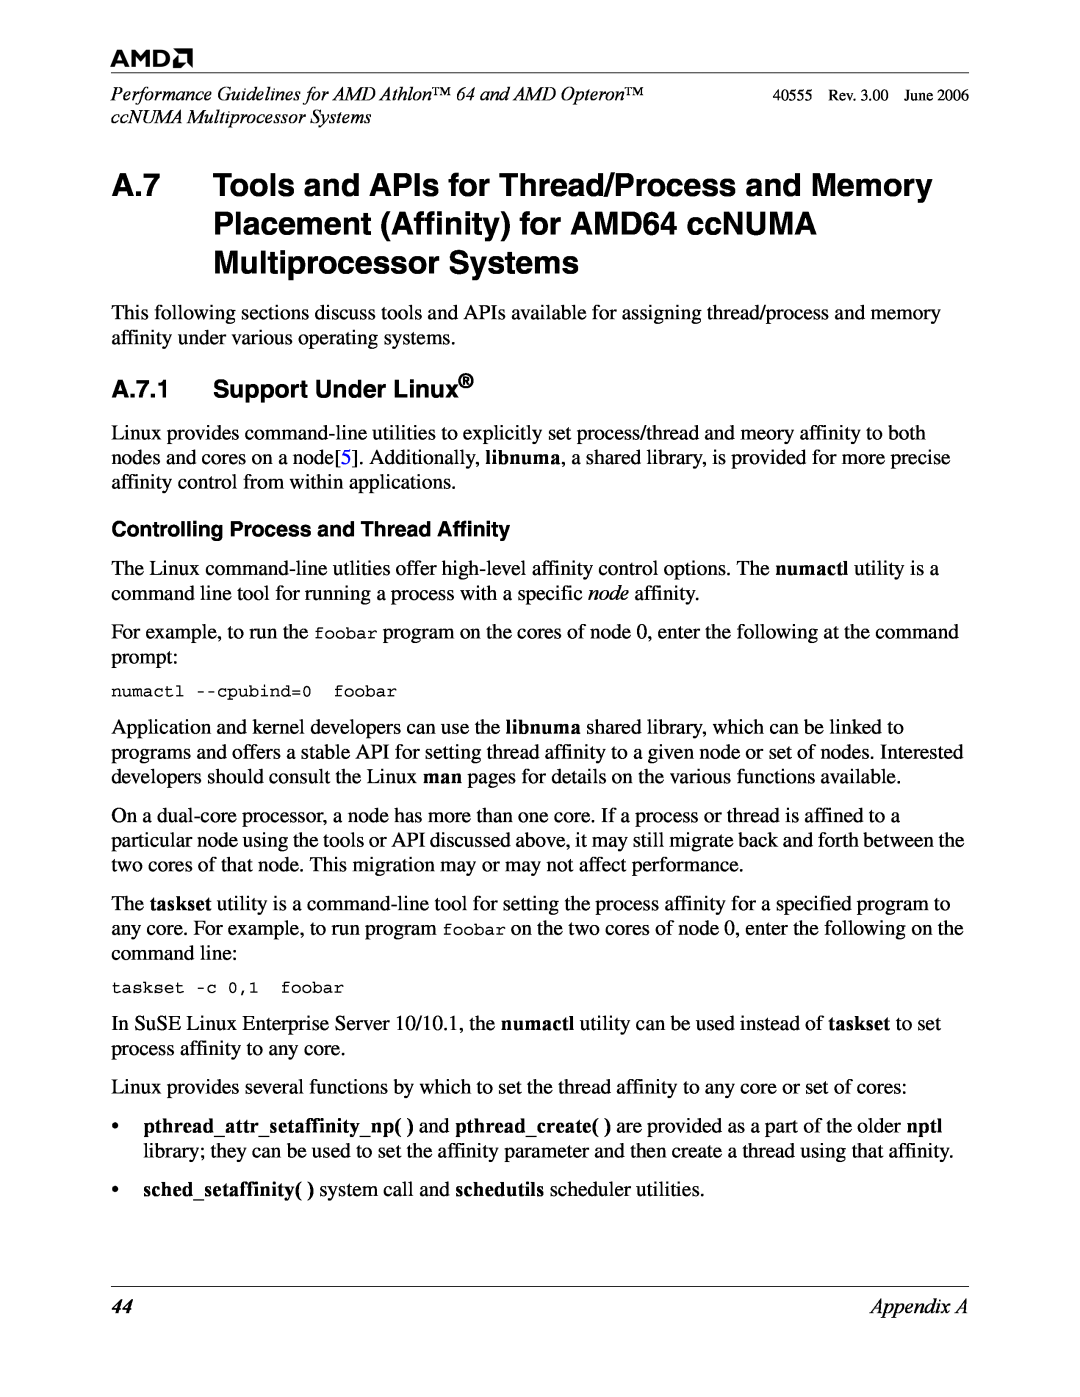 AMD 64 manual A.7.1 Support Under Linux, Controlling Process and Thread Affinity 